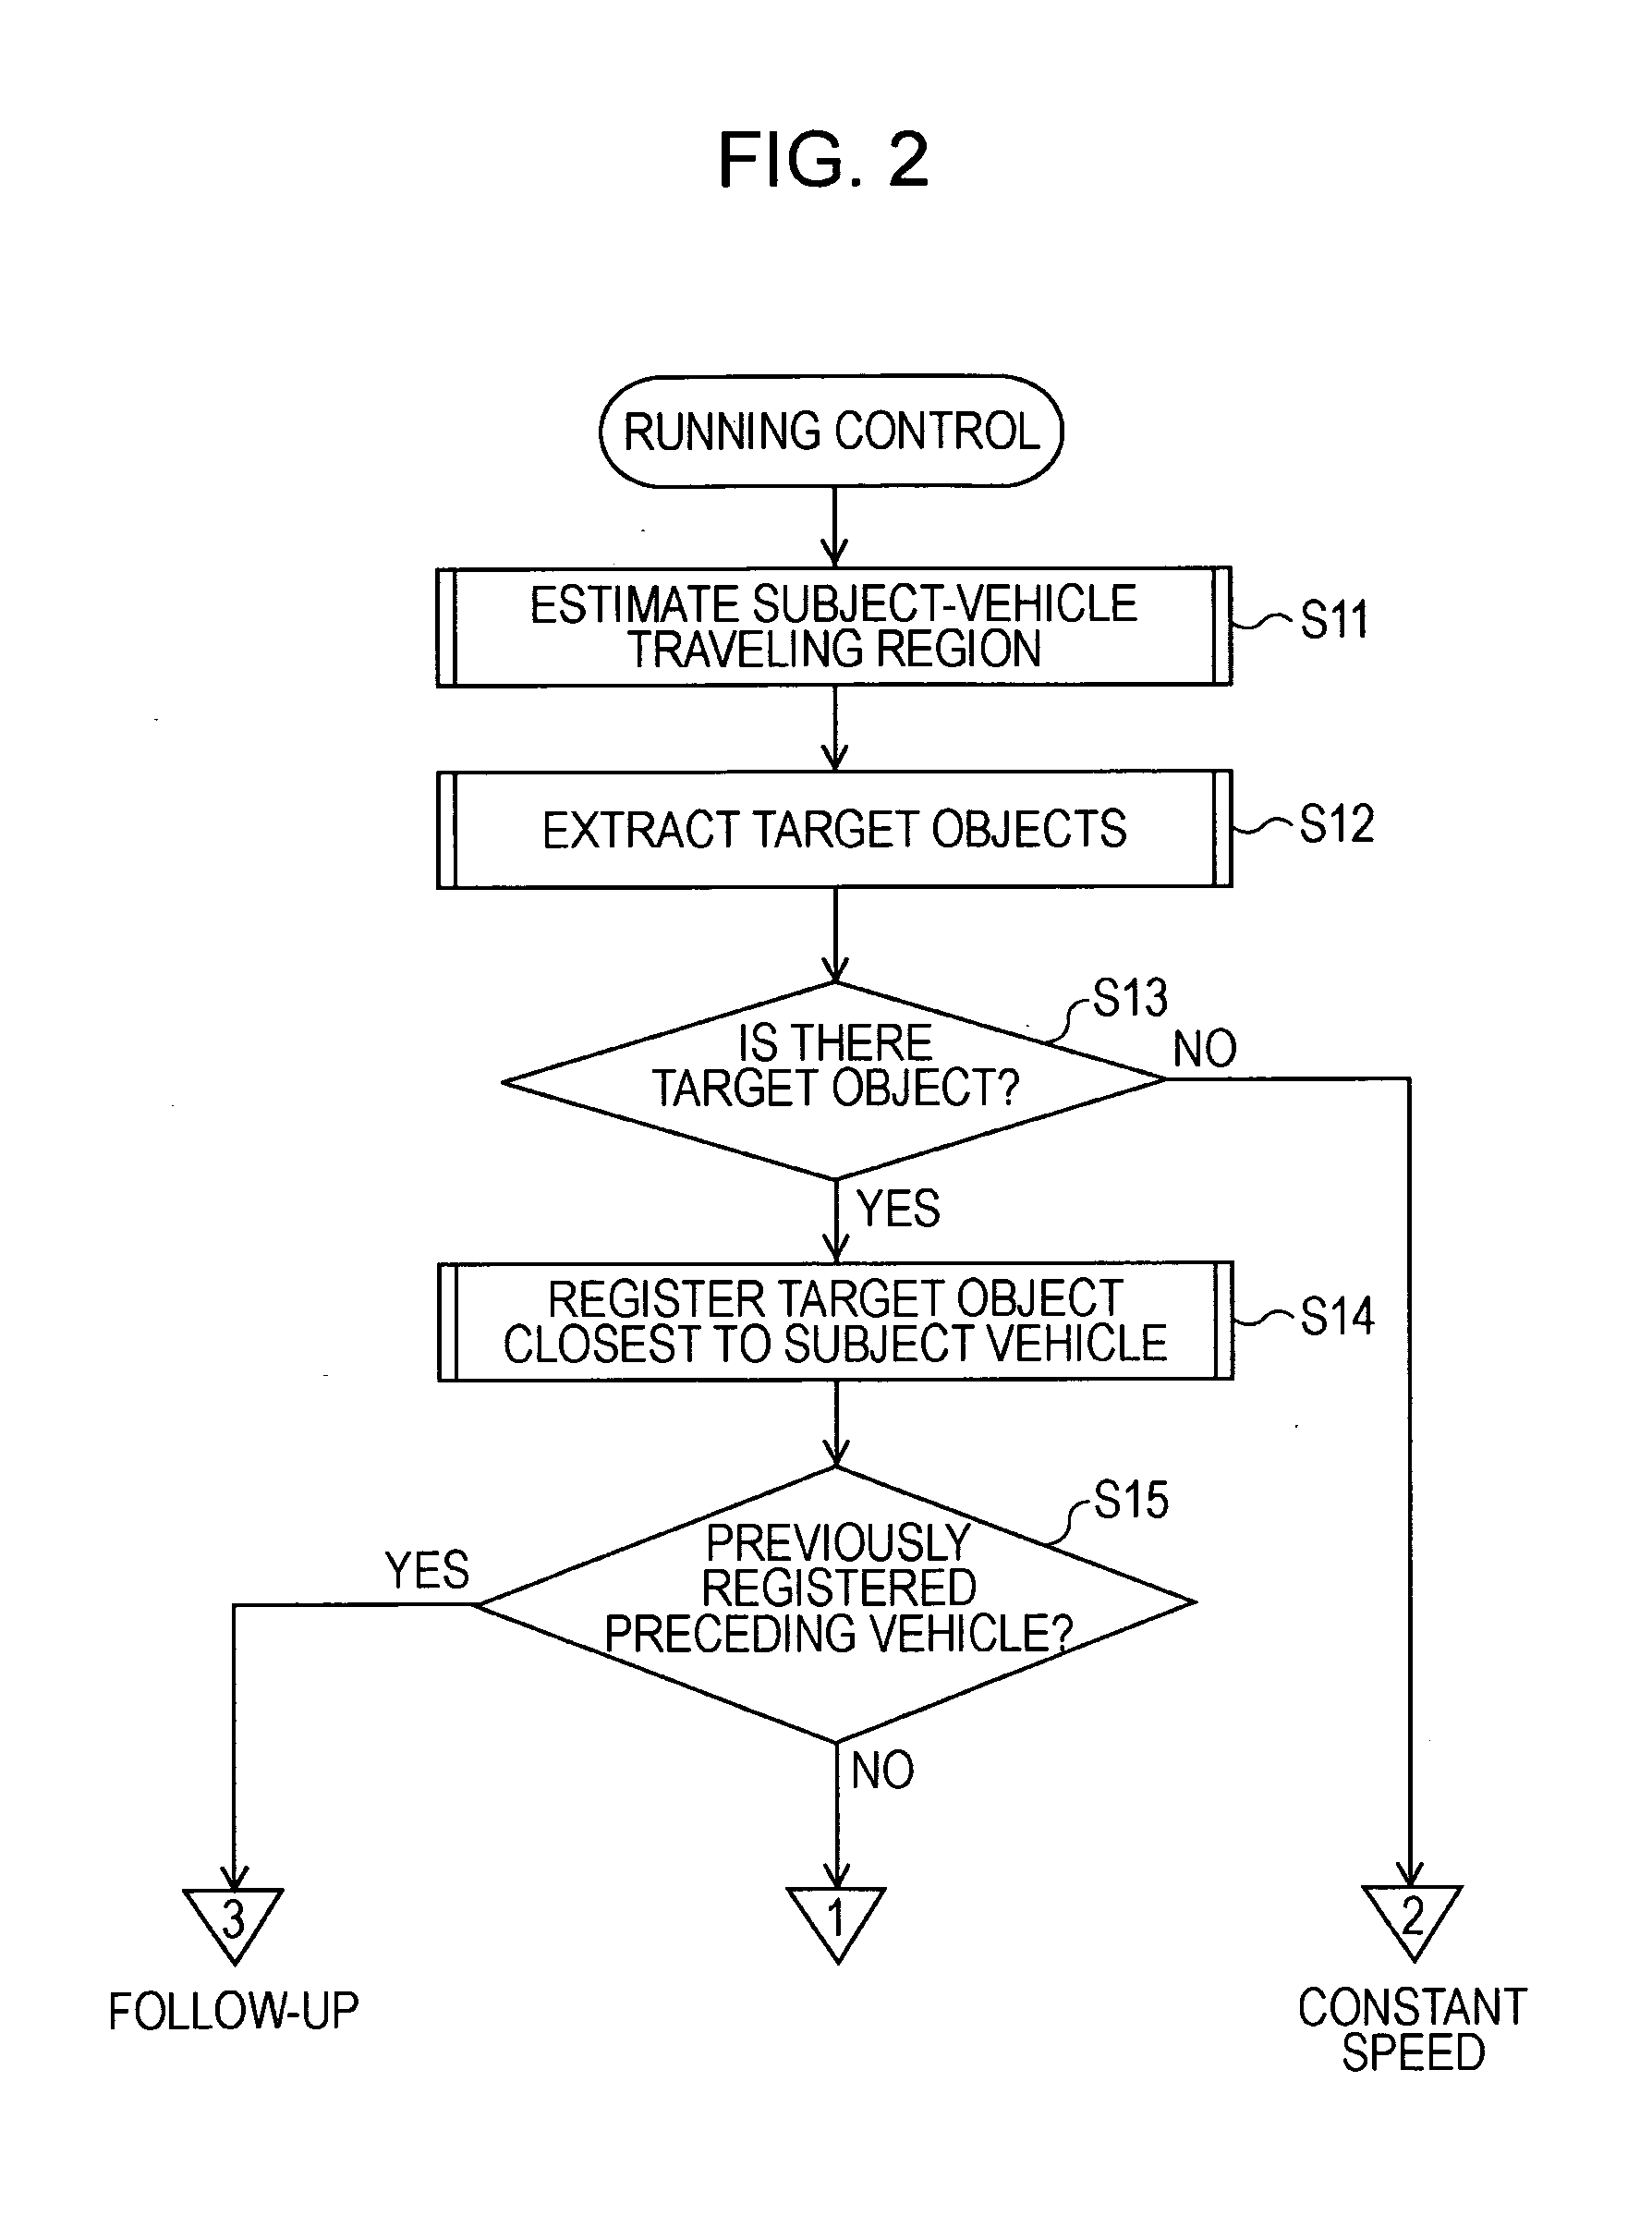 Vehicle running control system